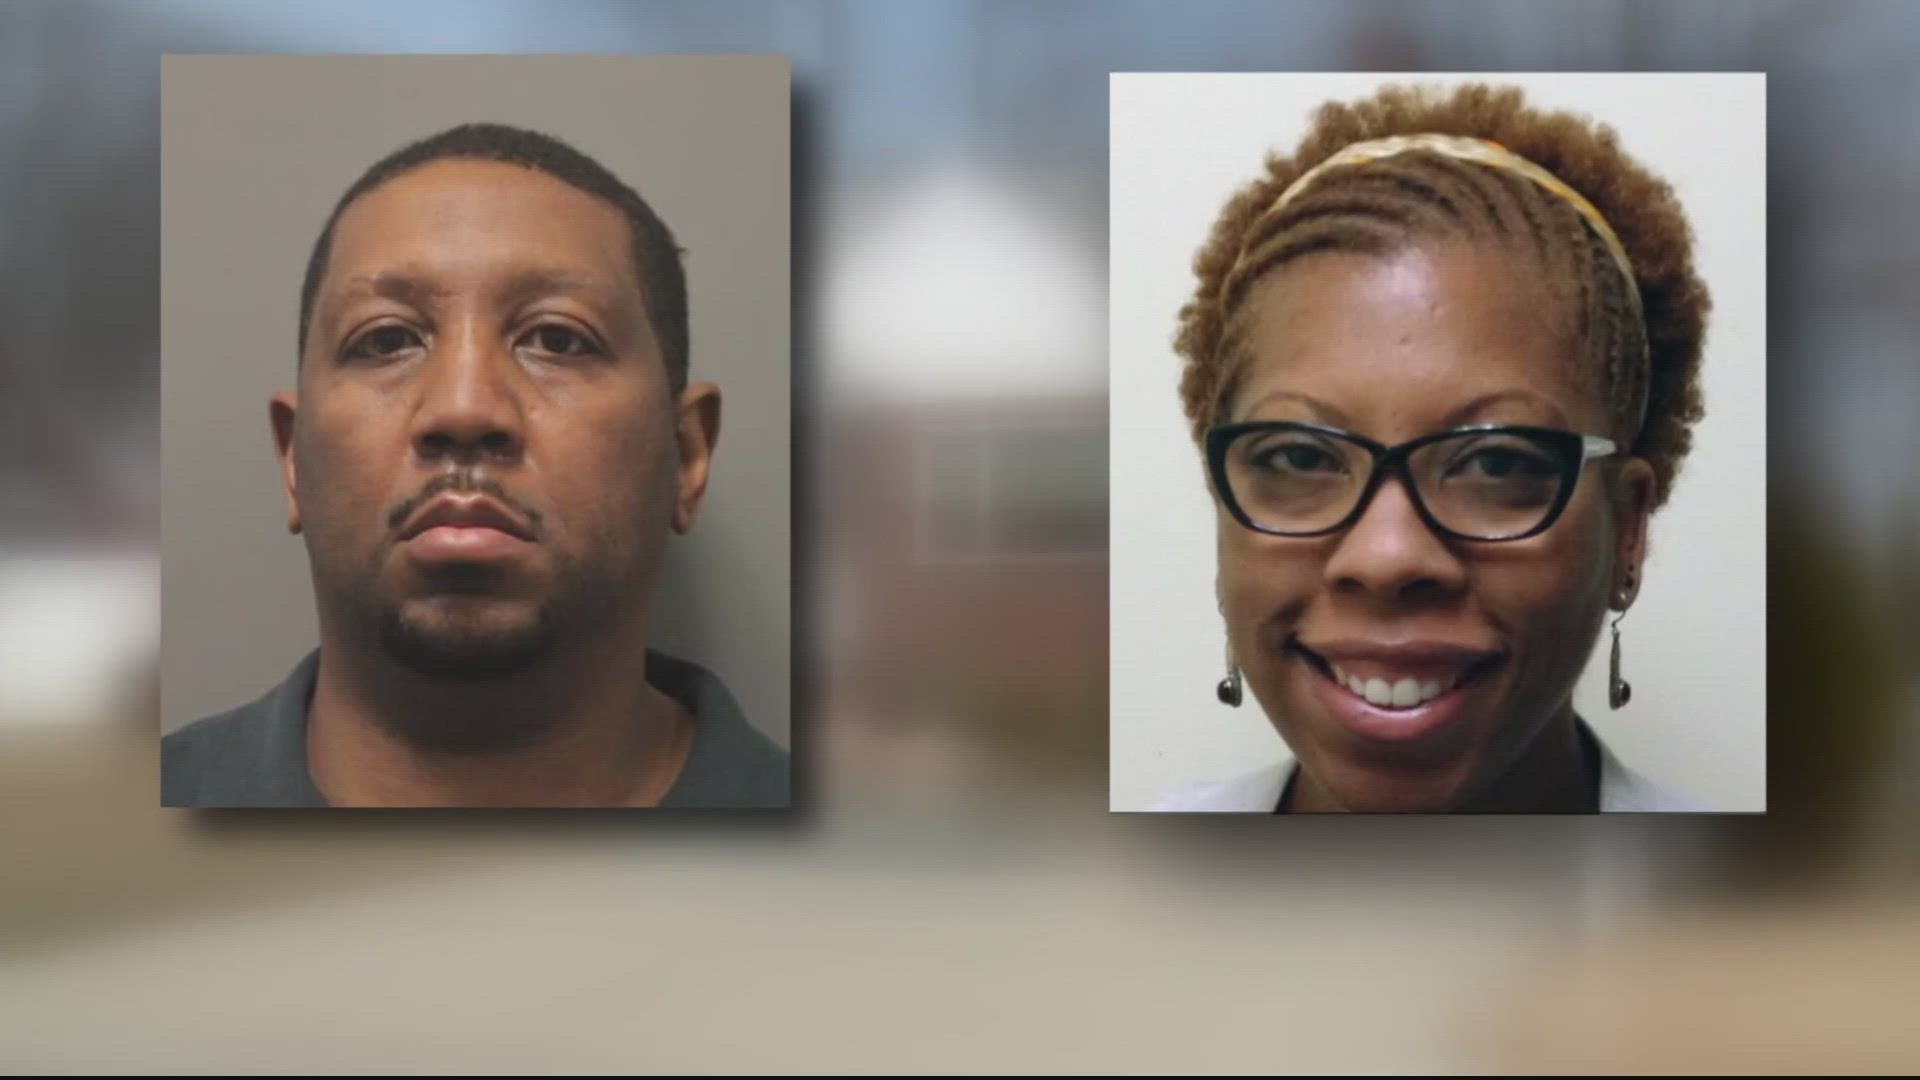 A  Silver Spring man is set to spend 55 years in prison for murdering his wife. He is Reginald Dunlap, 45 years old.